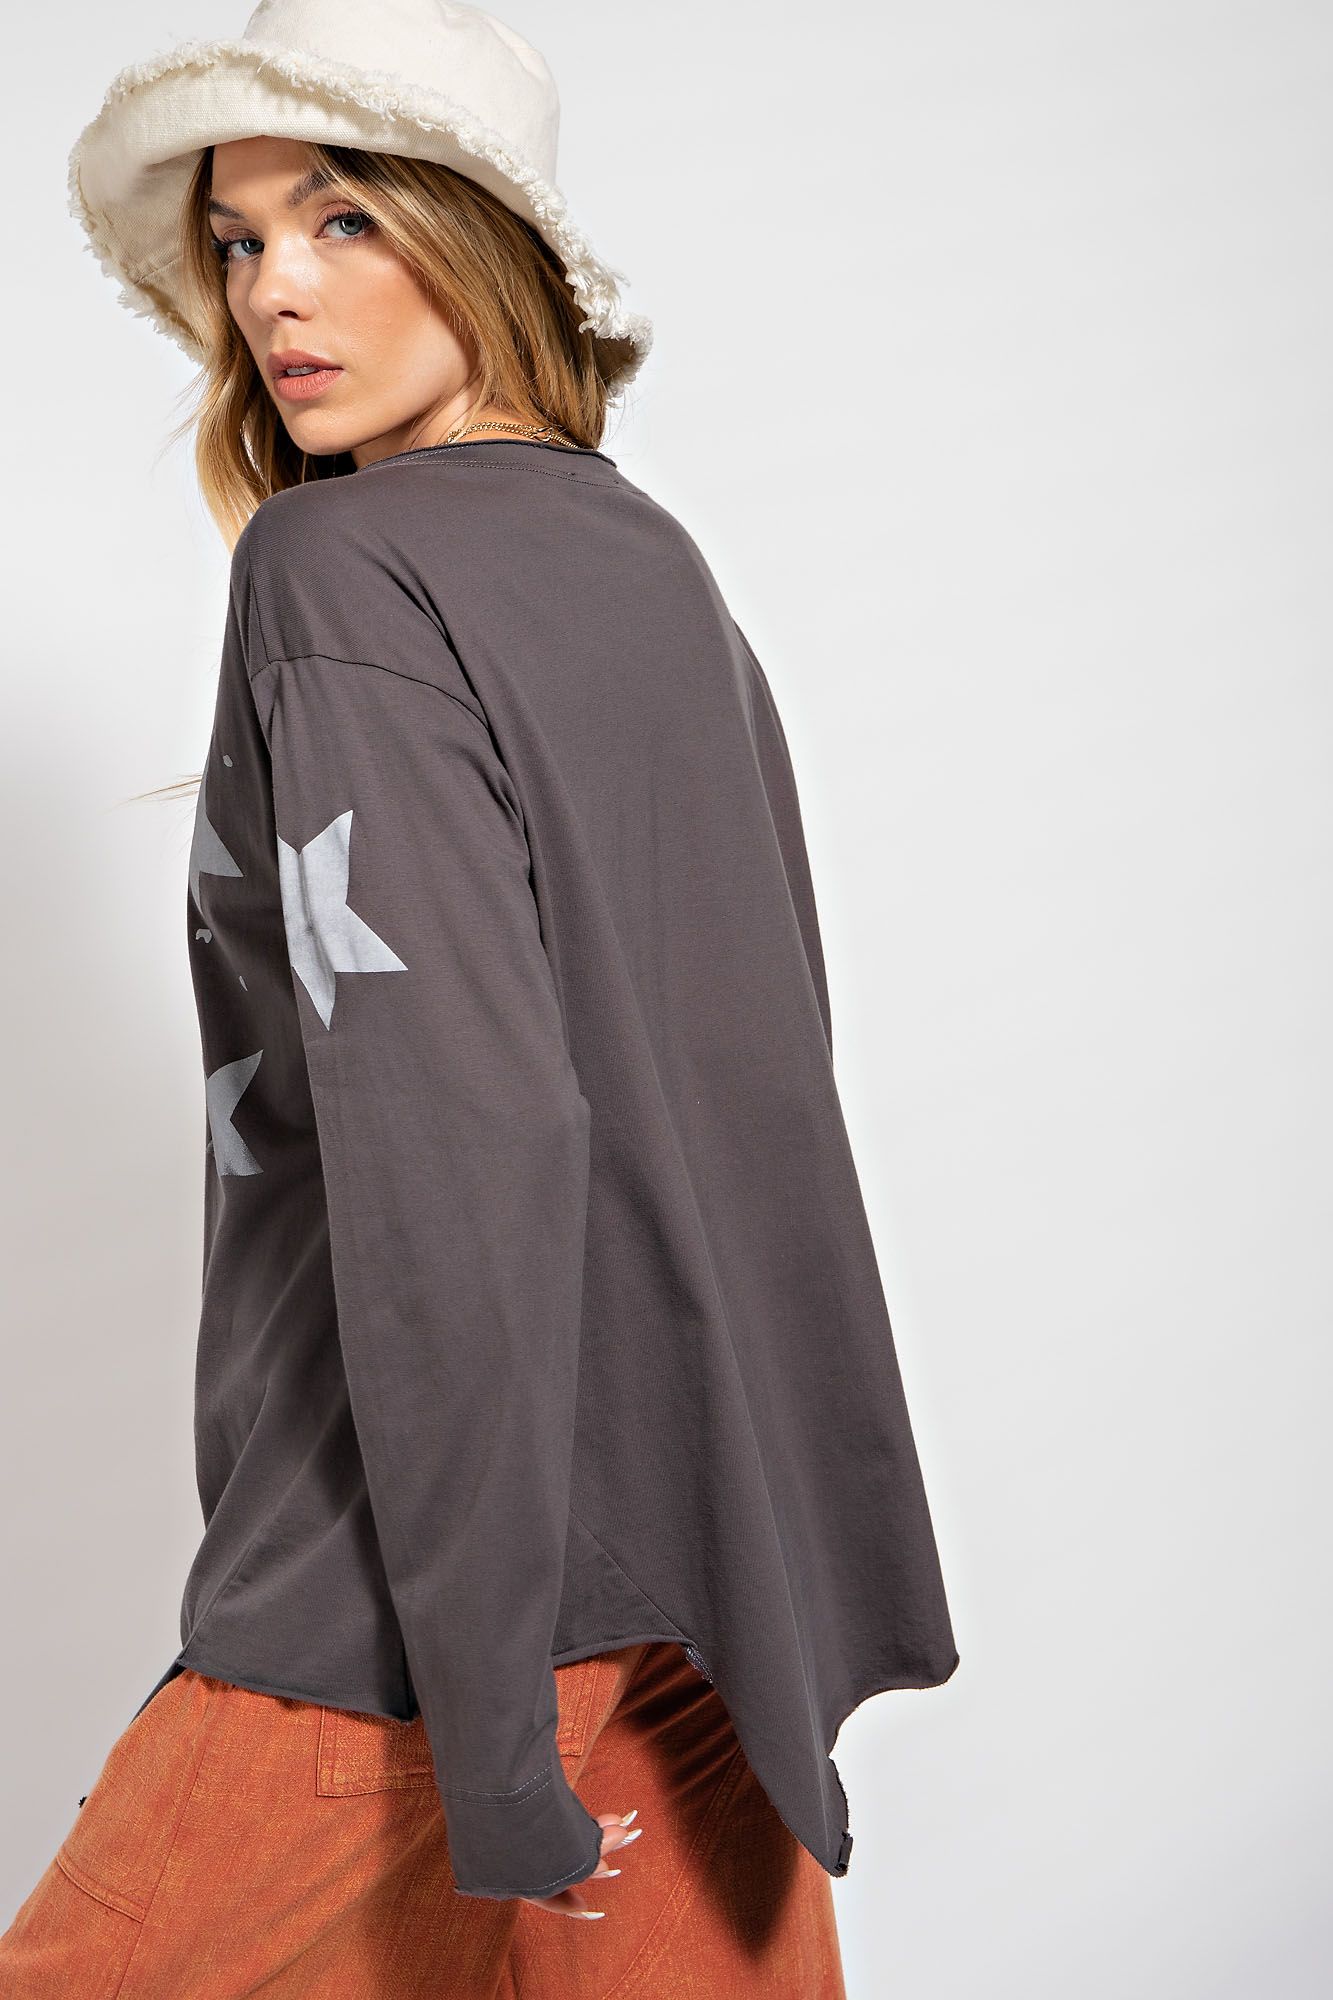 Easel Plus Star Printed Raw Edges Detail Cotton Tops